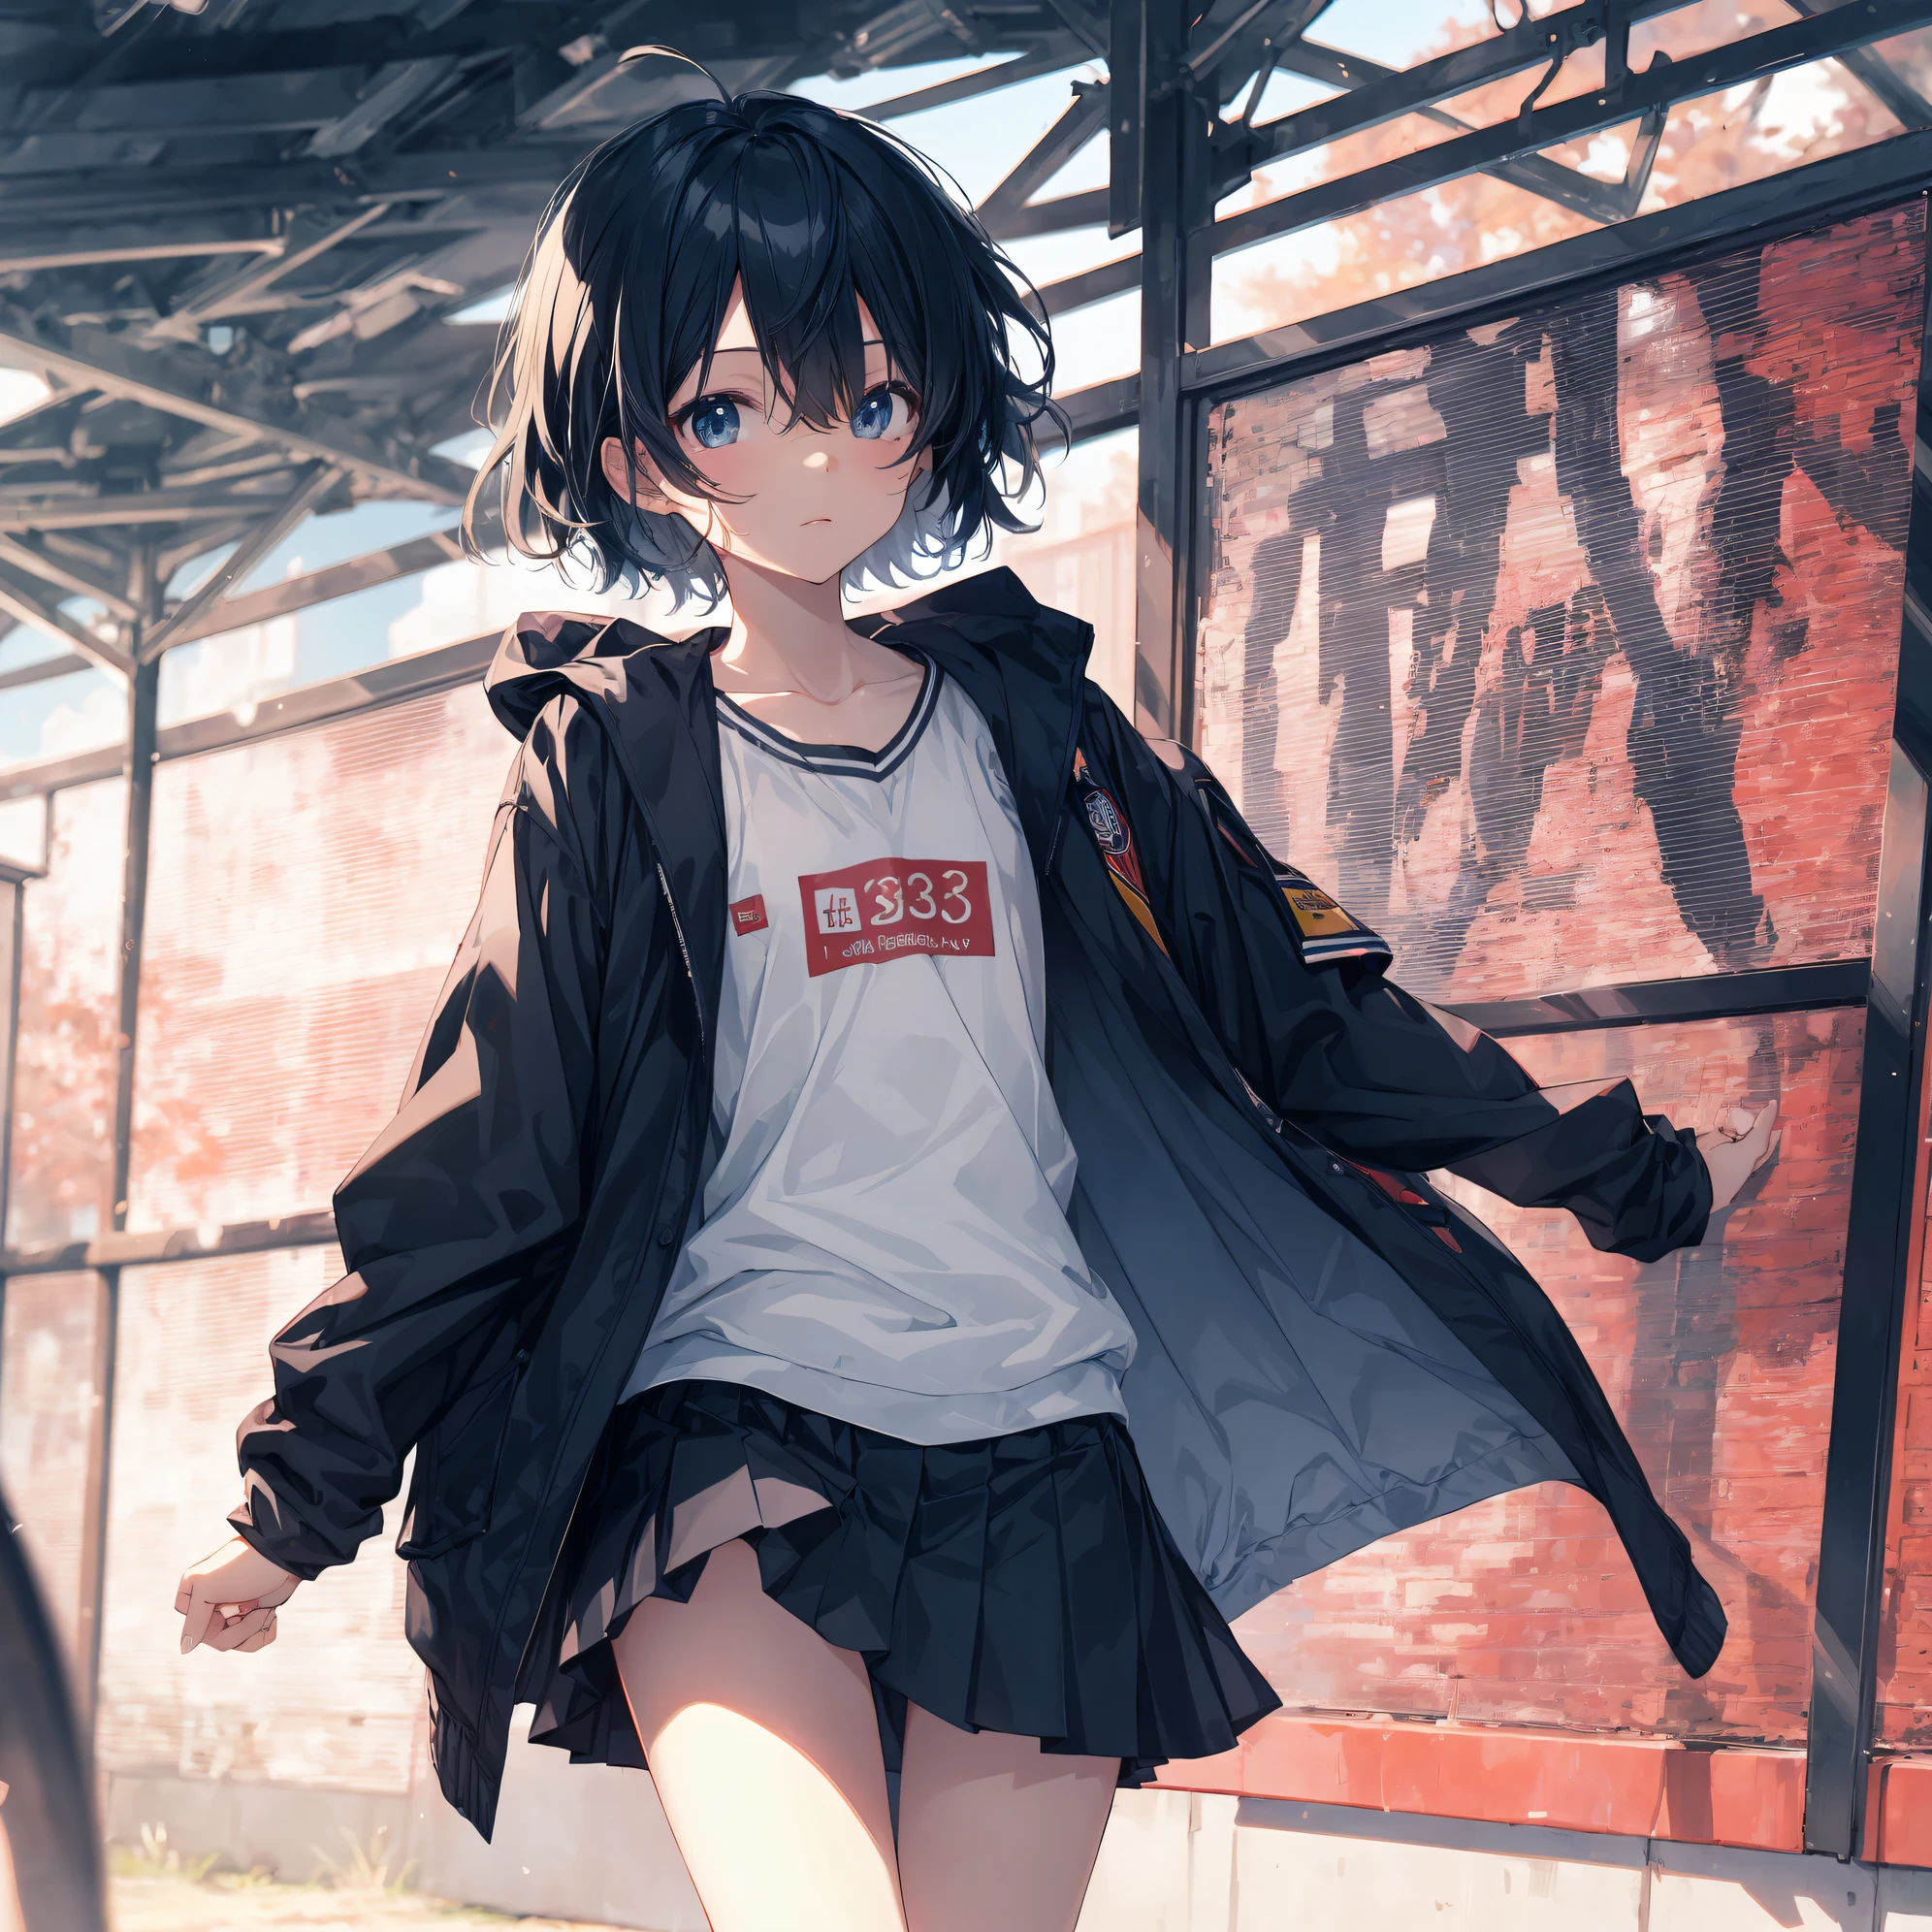 Top quality by creator God, Ultra-detailed, anime moe art style,Best Anime 8K Konachan Wallpapers,Pixiv Contest Winner,Perfect Anatomy, BREAK,(Draw a girl sleepily walking to school. ),BREAK, 1girl in, (Solo,,,13years:1.3),a junior high school student, Androgynous attraction, (Very short hair), hair messy, Full limbs, complete fingers,flat chest, Small butt, groin, Small eyes,Beautiful detailed black eyes,Well-proportioned iris and pupils, , Skirt,On the way to school. BREAK,High resolution,super detailed skin, Best lighting by professional AI, 8K, Illustration,